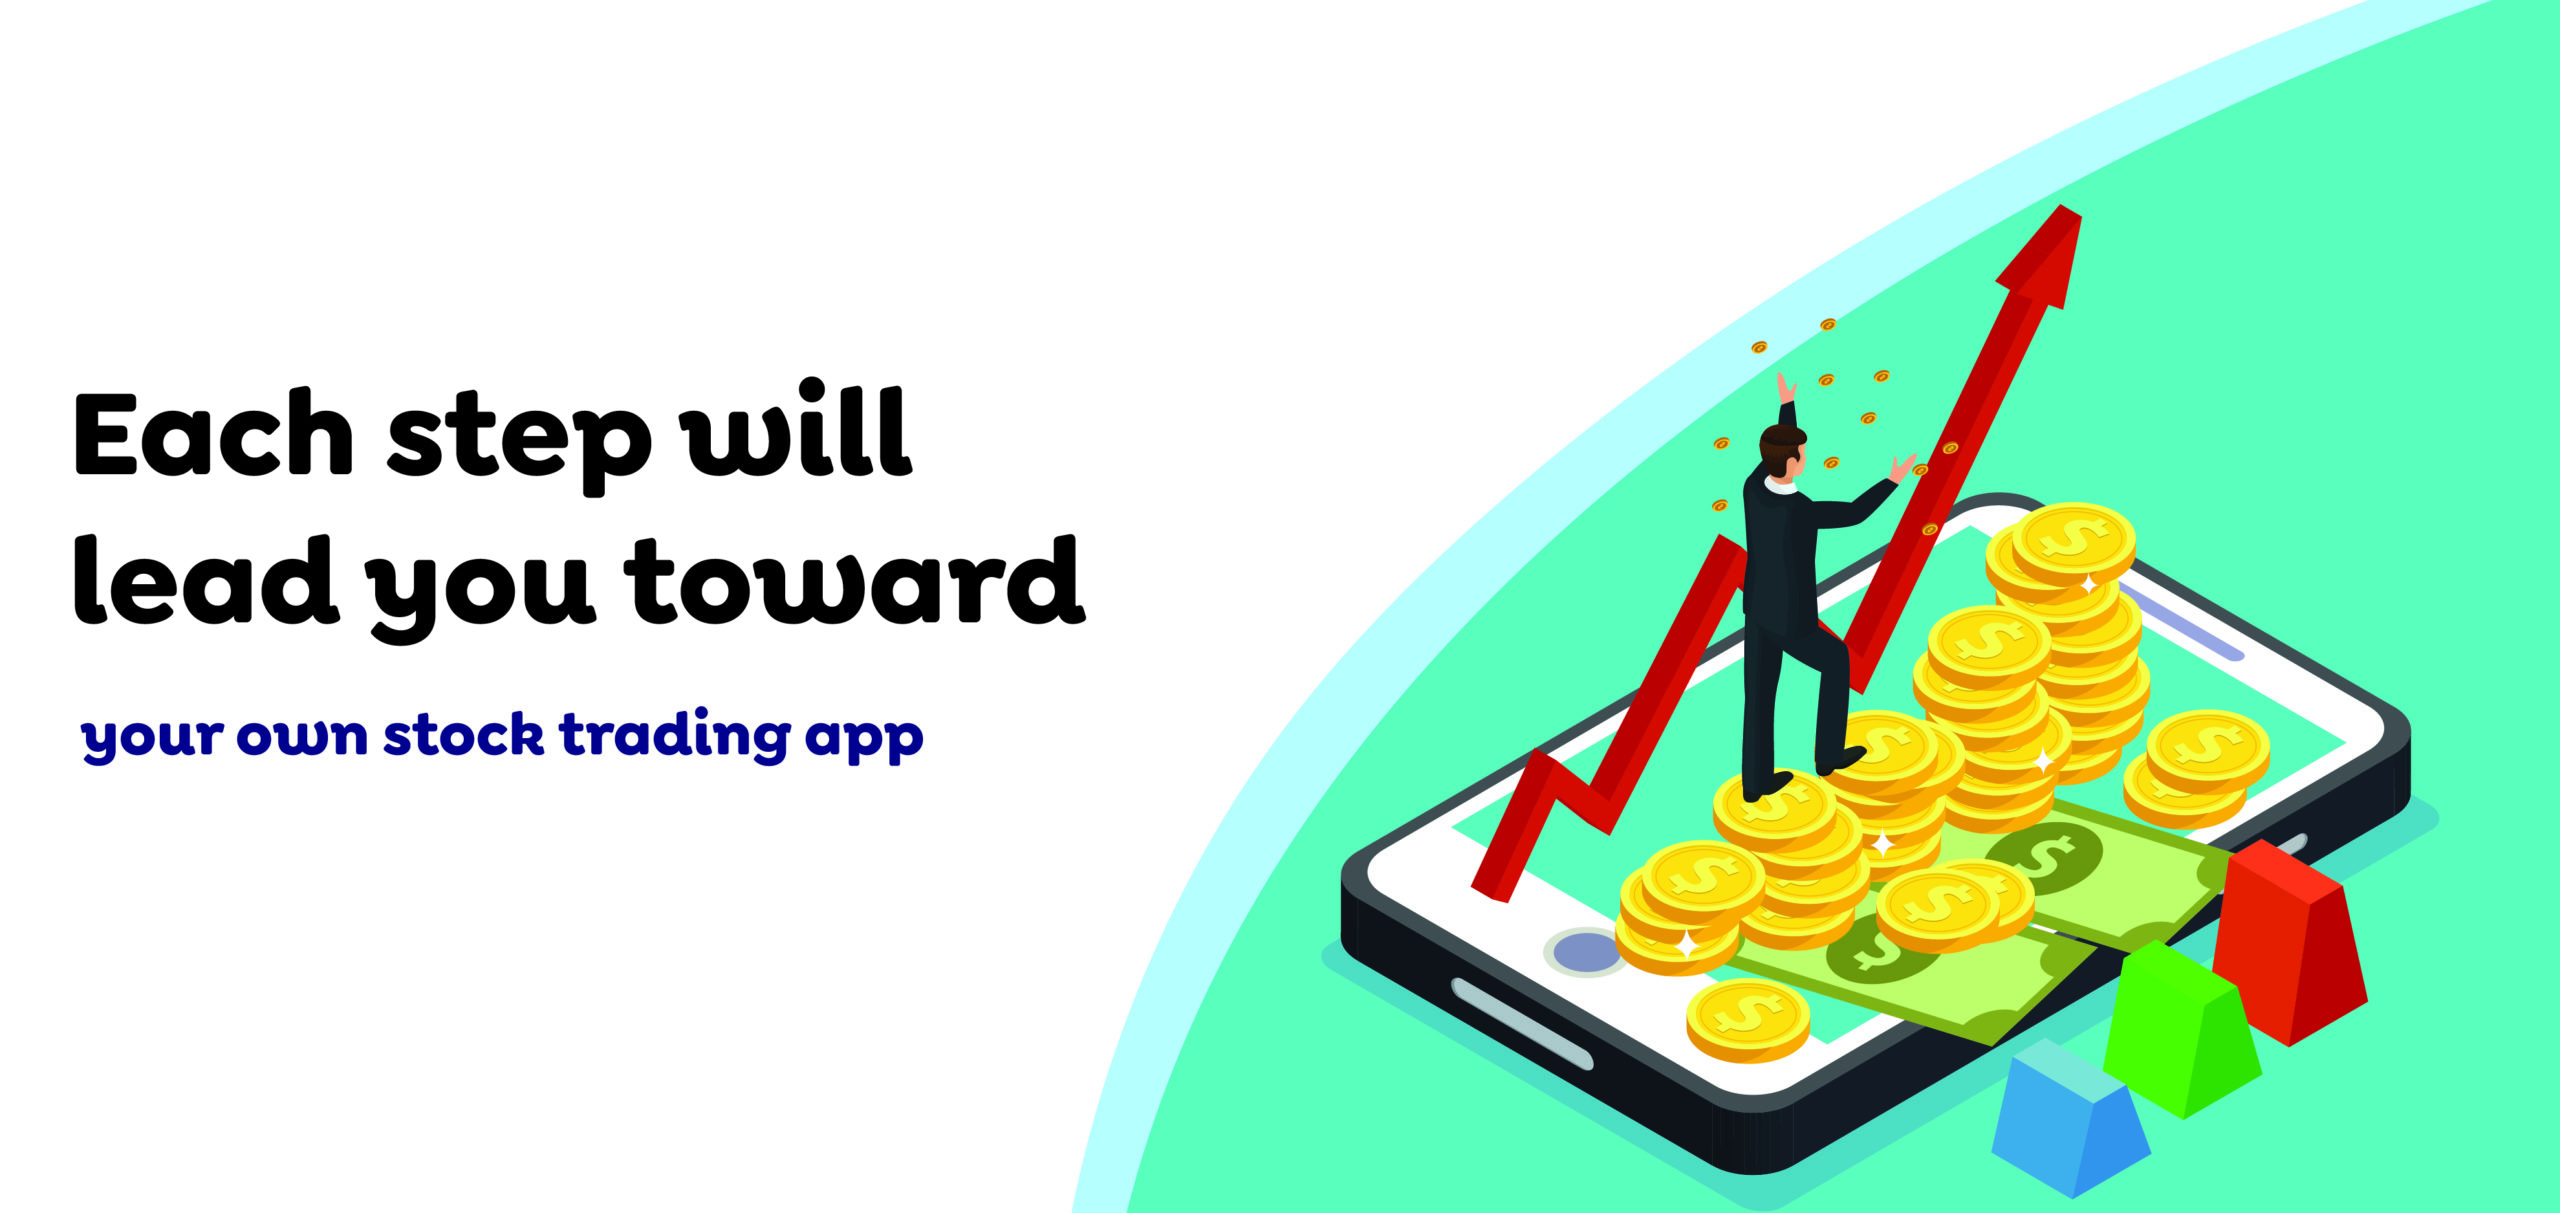 Each step will lead you toward your own stock trading app